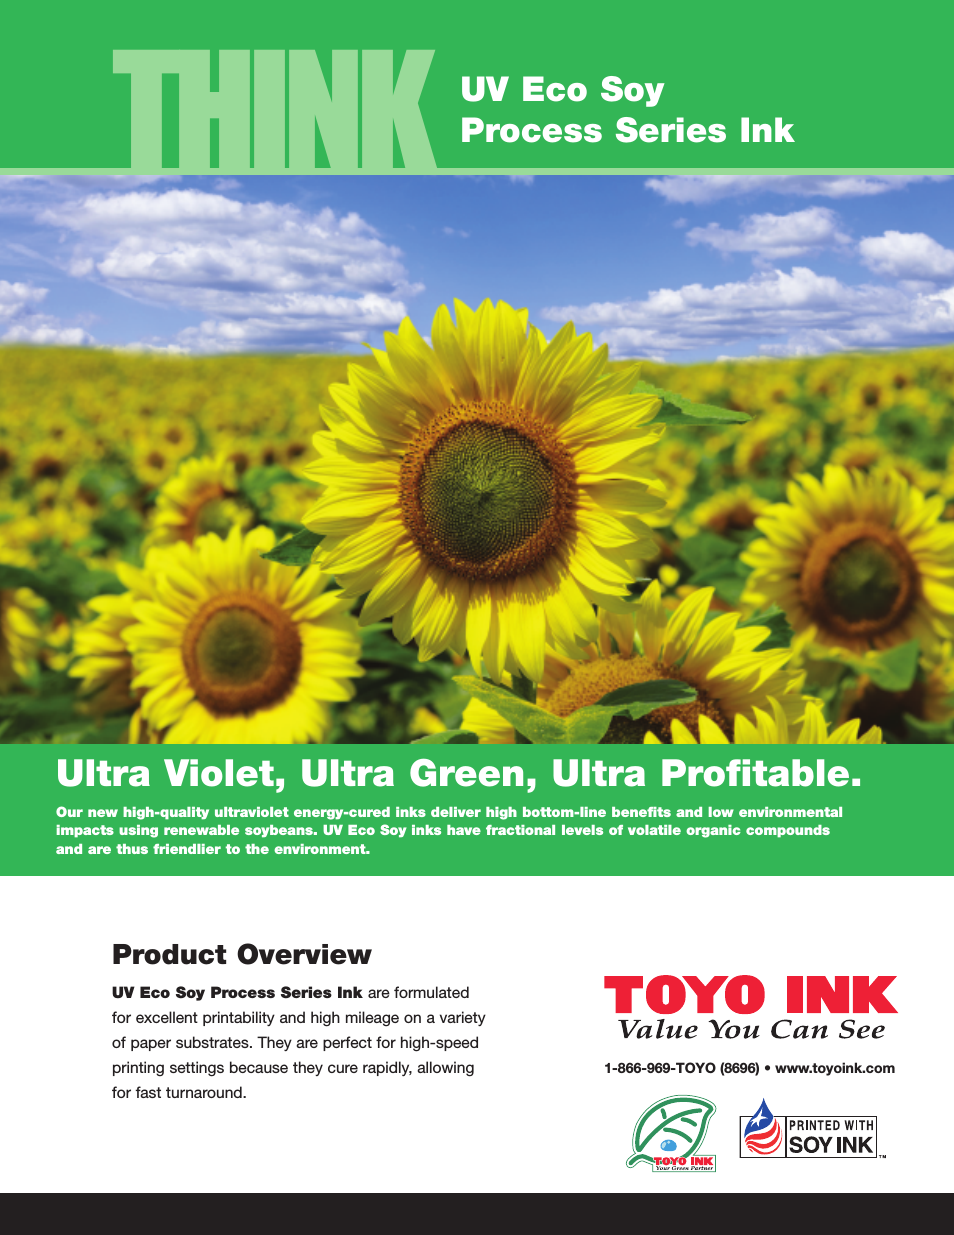 UV Eco Soy Process Series Ink